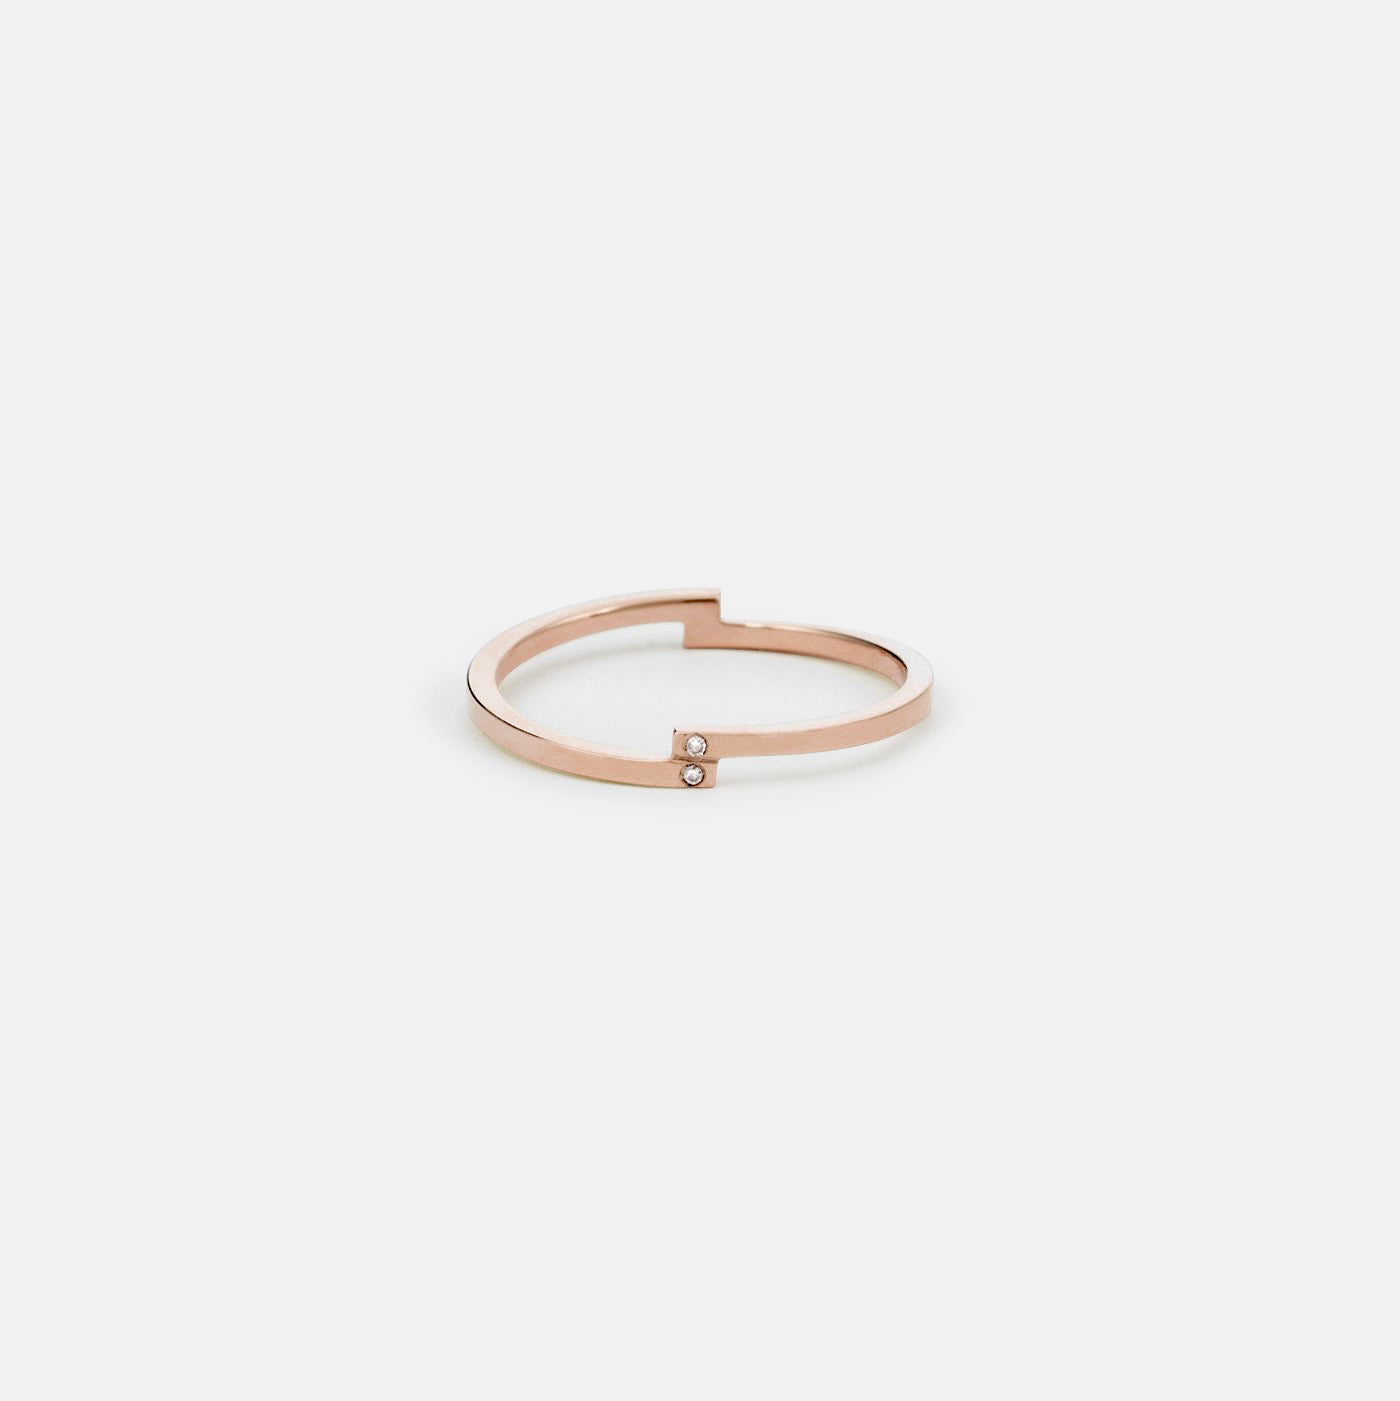 Pili Handmade Ring in 14k Rose Gold set with White and Black Diamonds By SHW Fine Jewelry New York City